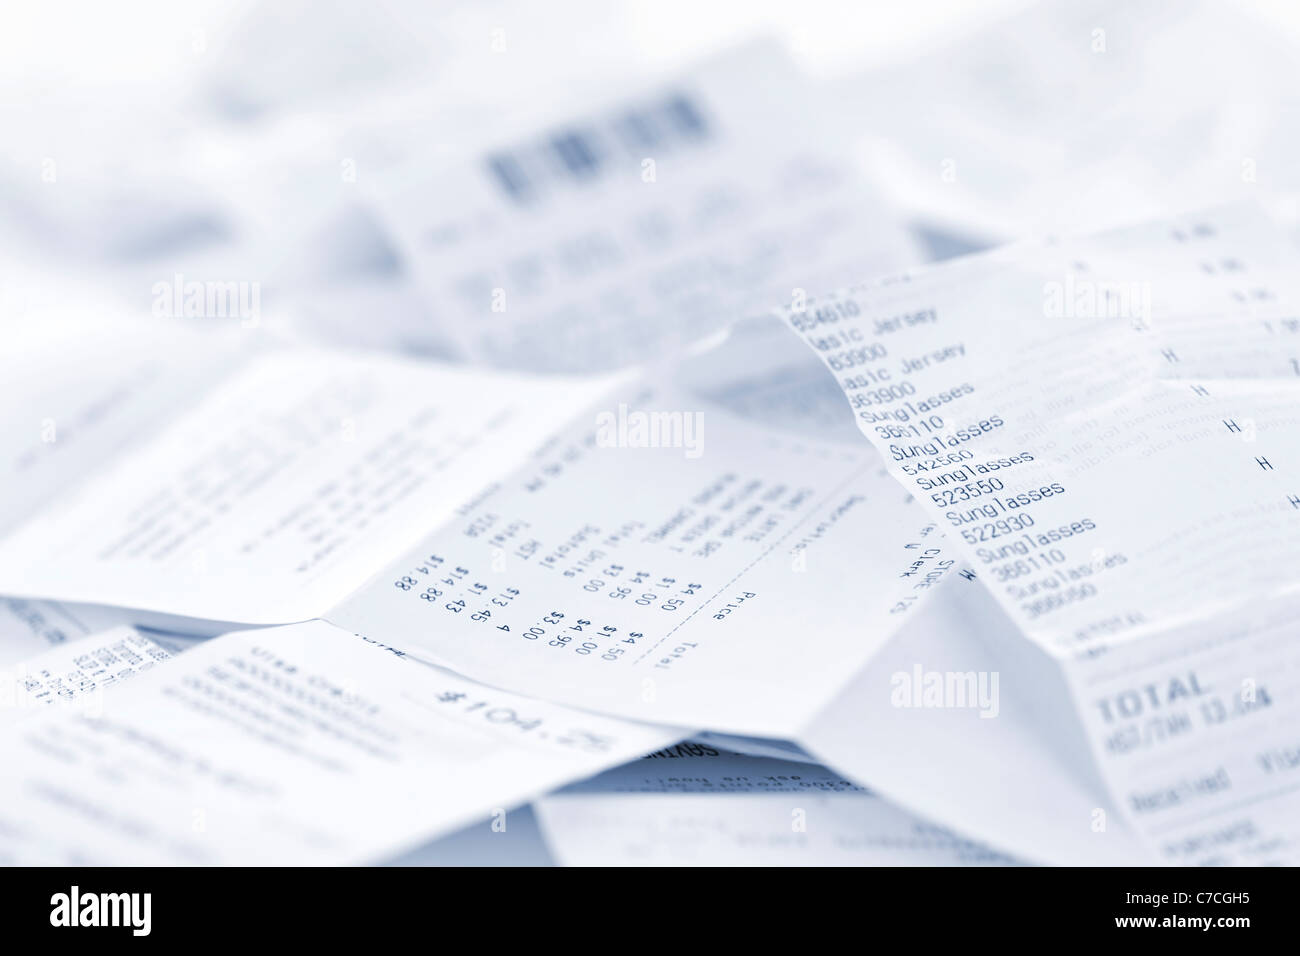 Paper cash register receipts in a lose pile close up Stock Photo